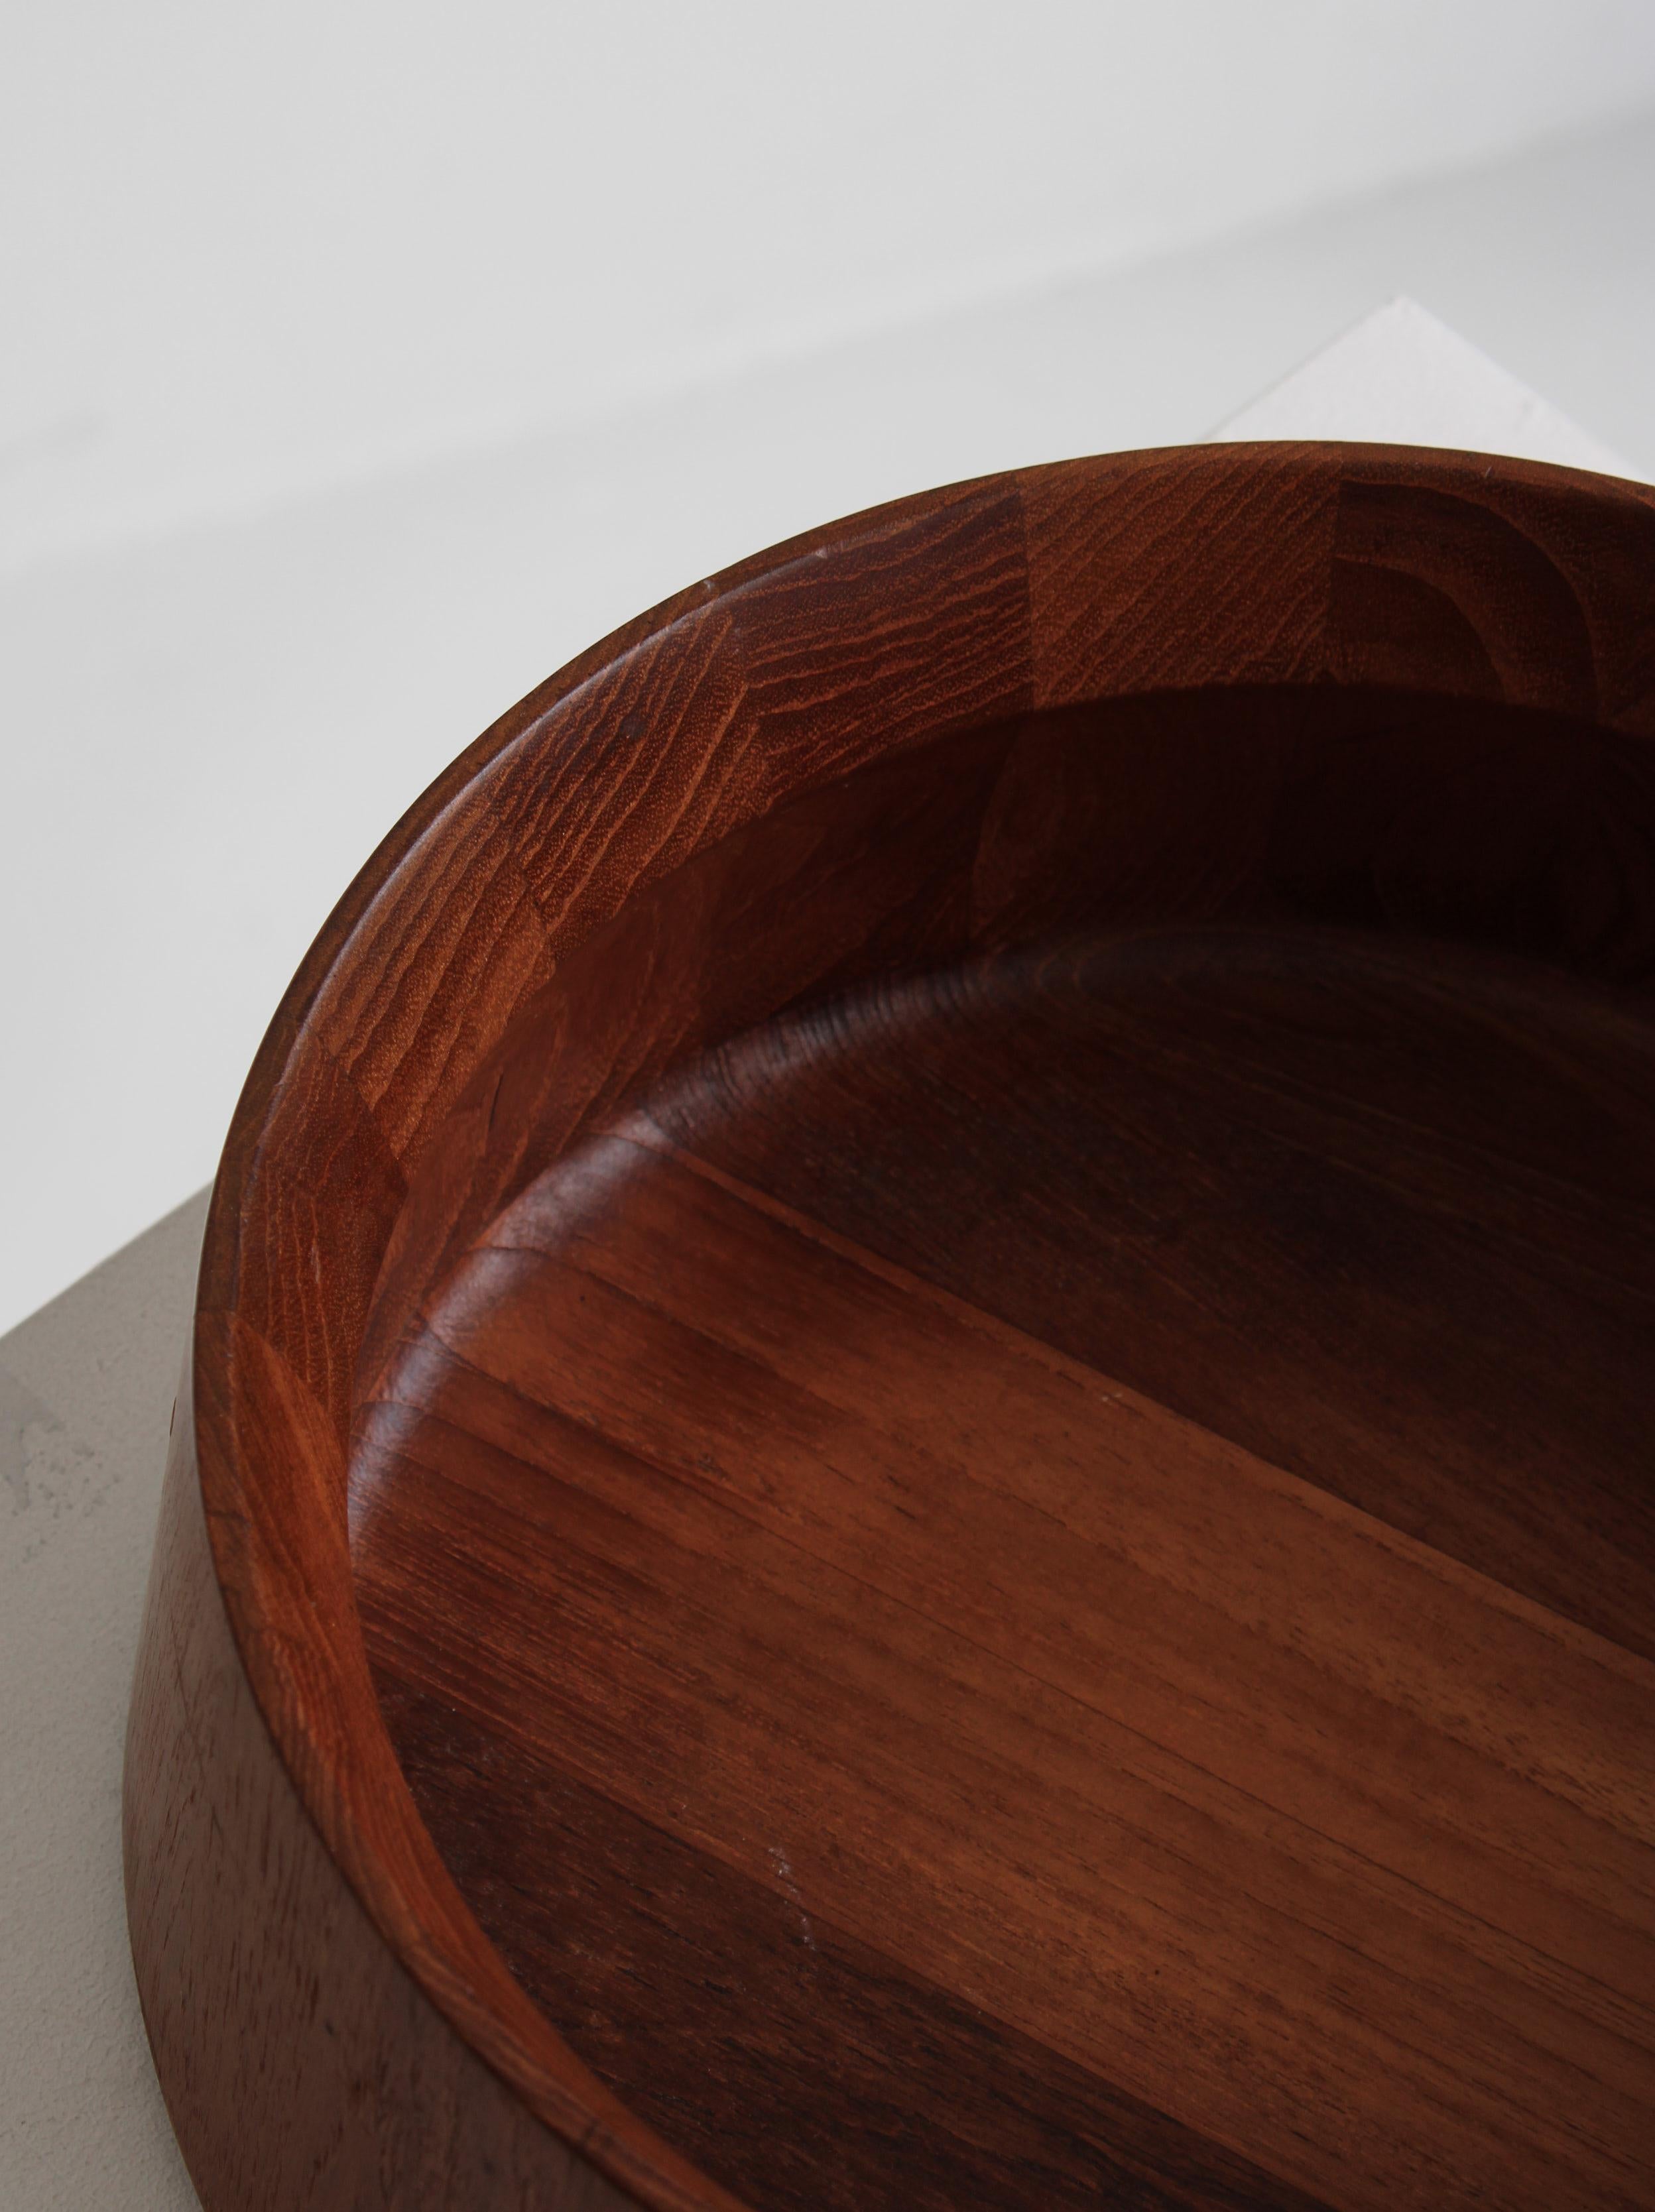 Large Teakwood Serving Bowl by Jens Harald Quistgaard, Denmark, 1960s In Good Condition For Sale In Odense, DK